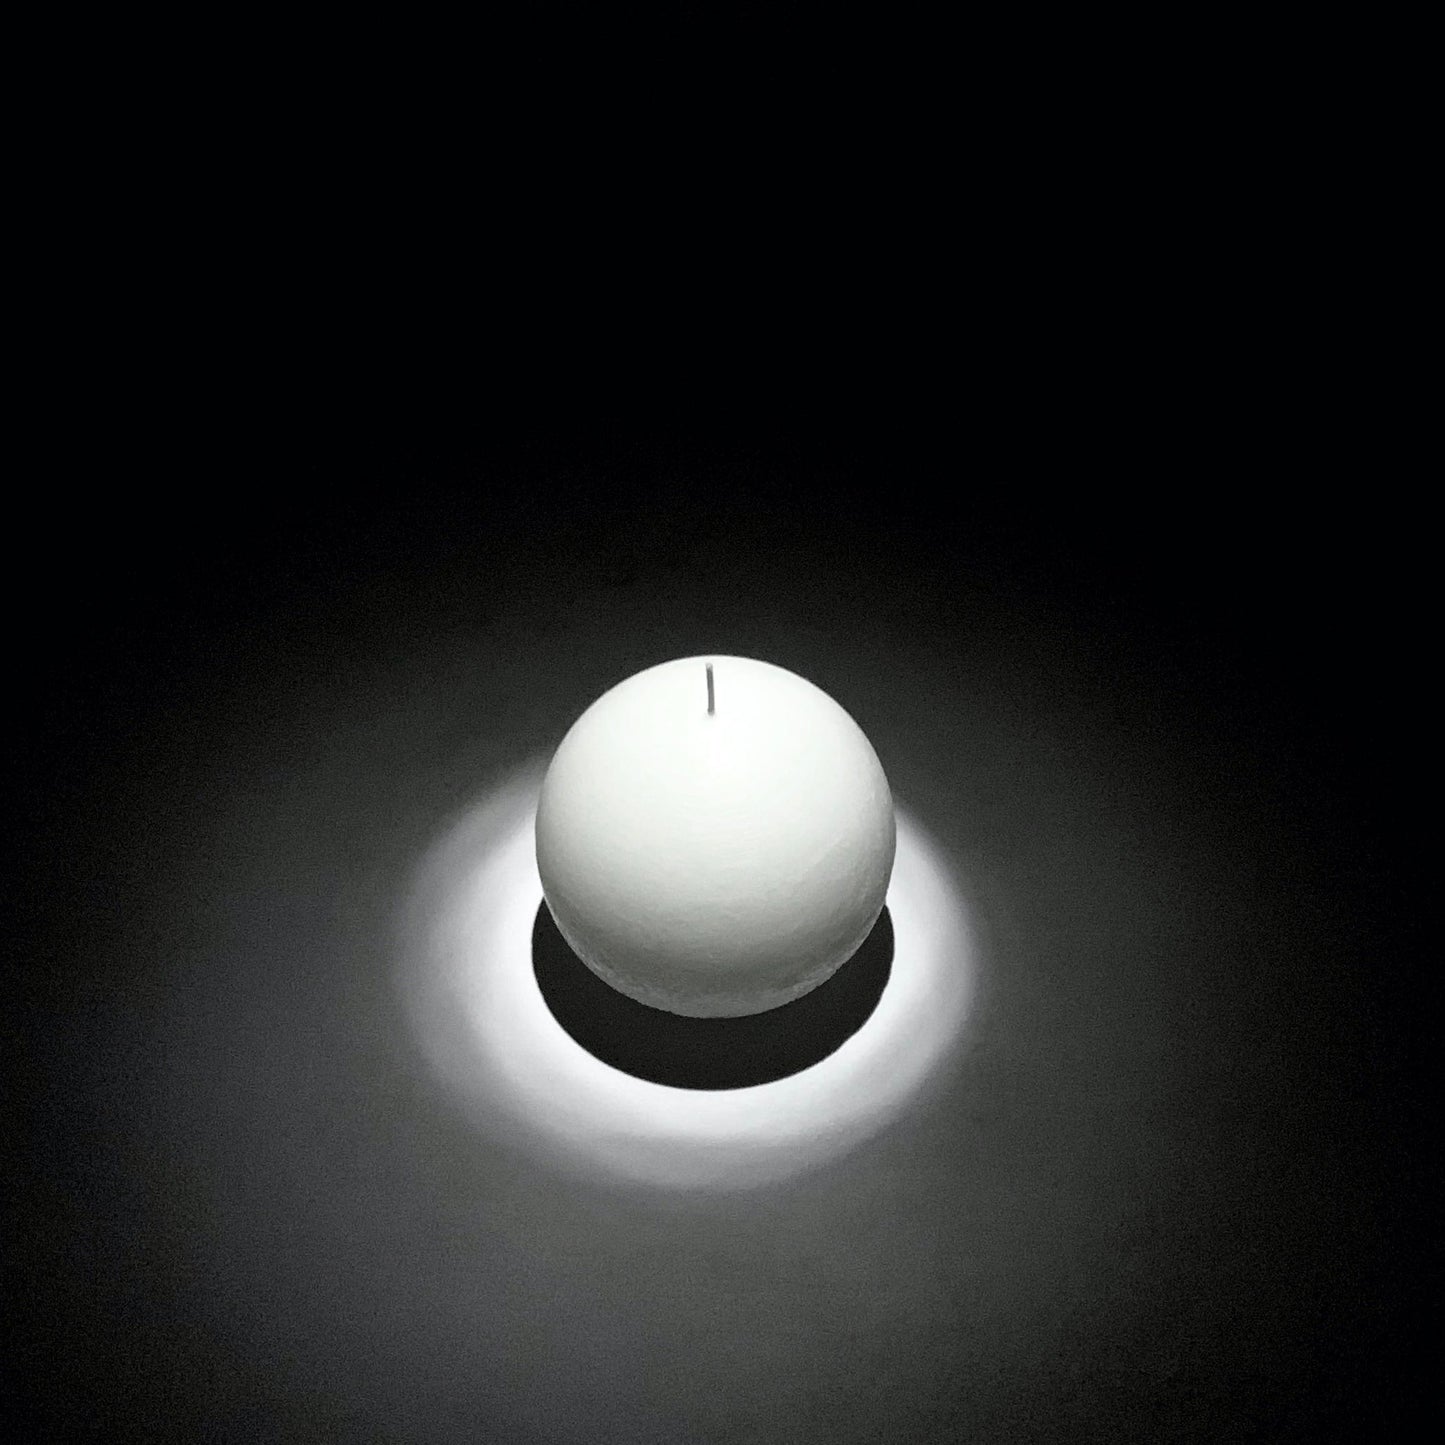 White sphere candle